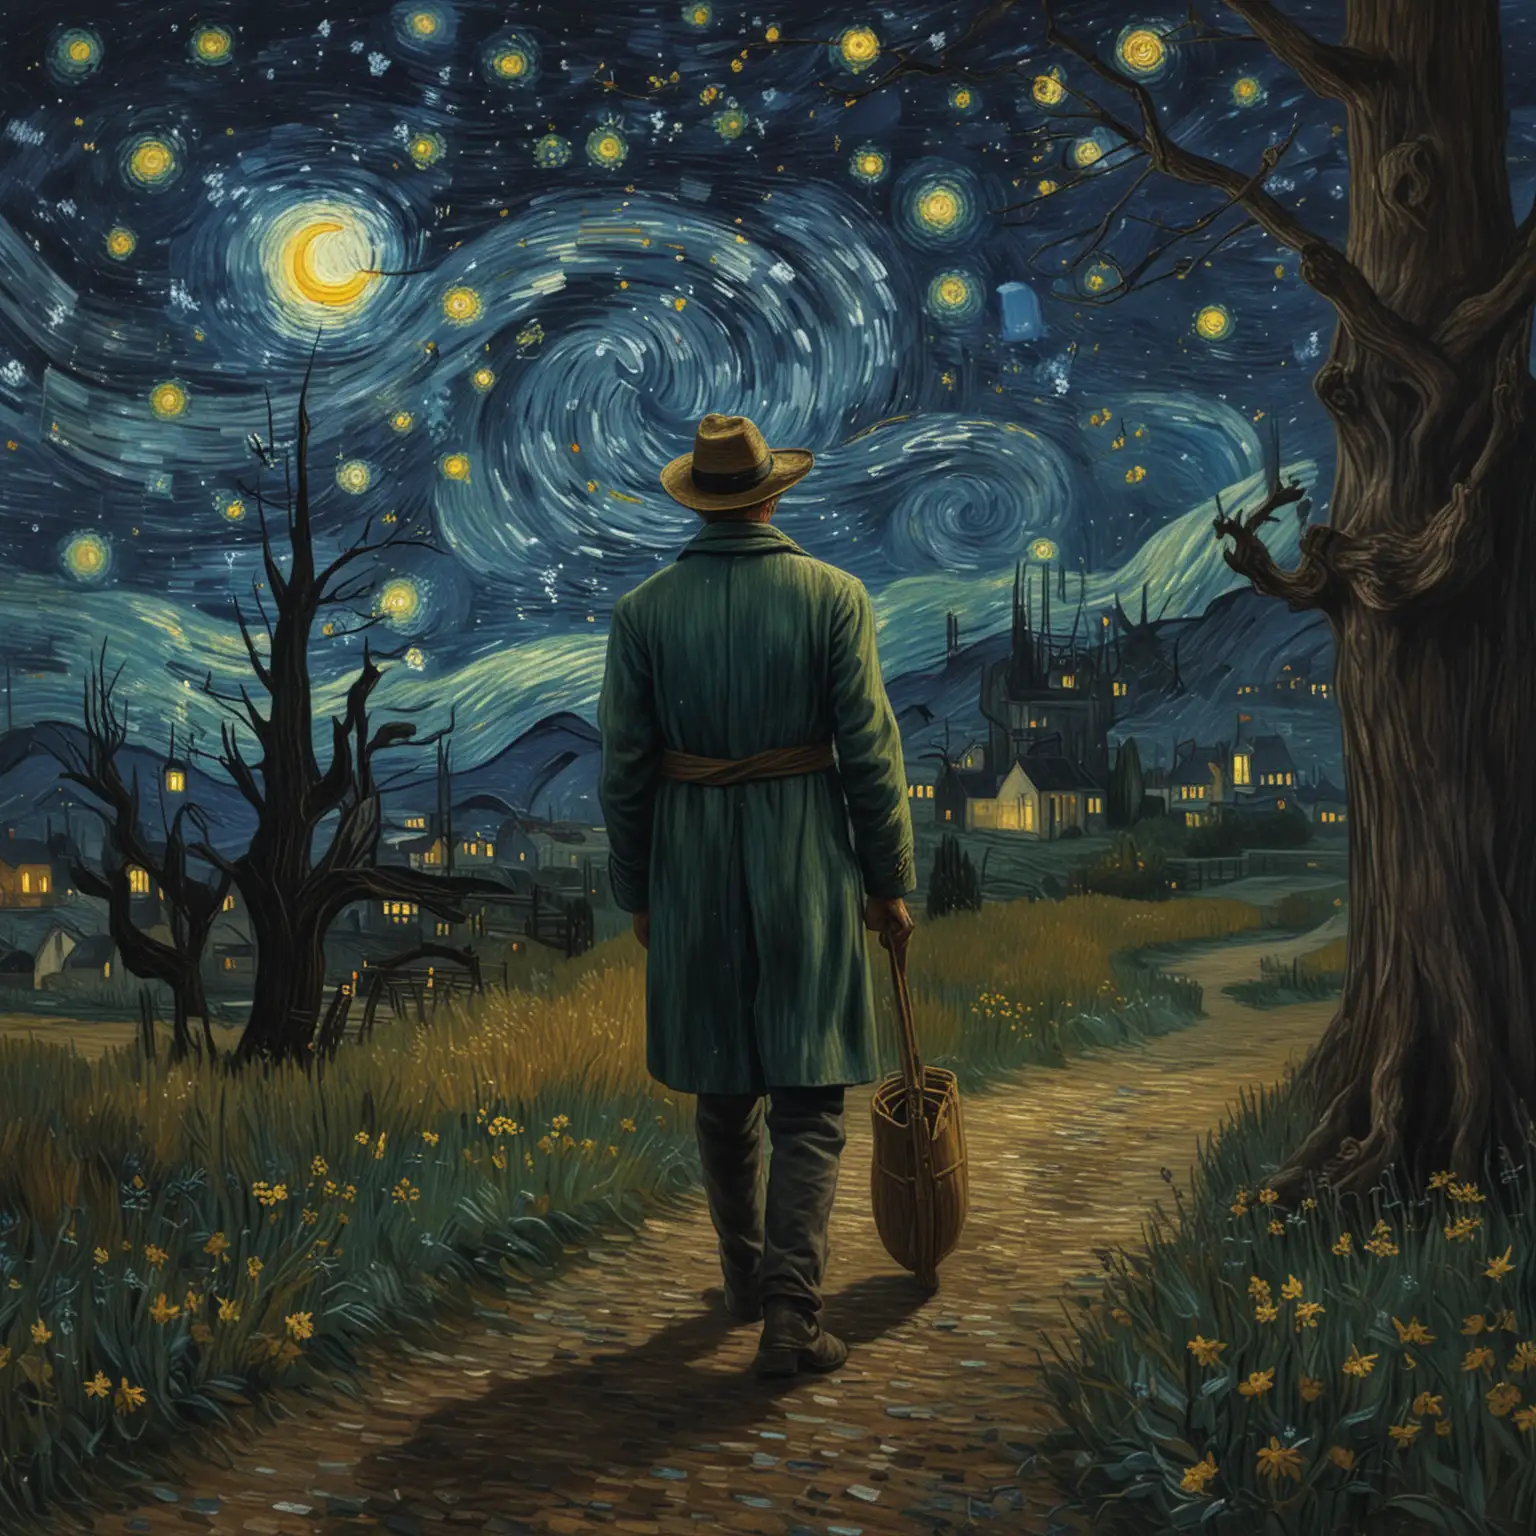 Starry nights, they guide Vincent Van Gogh through the dark